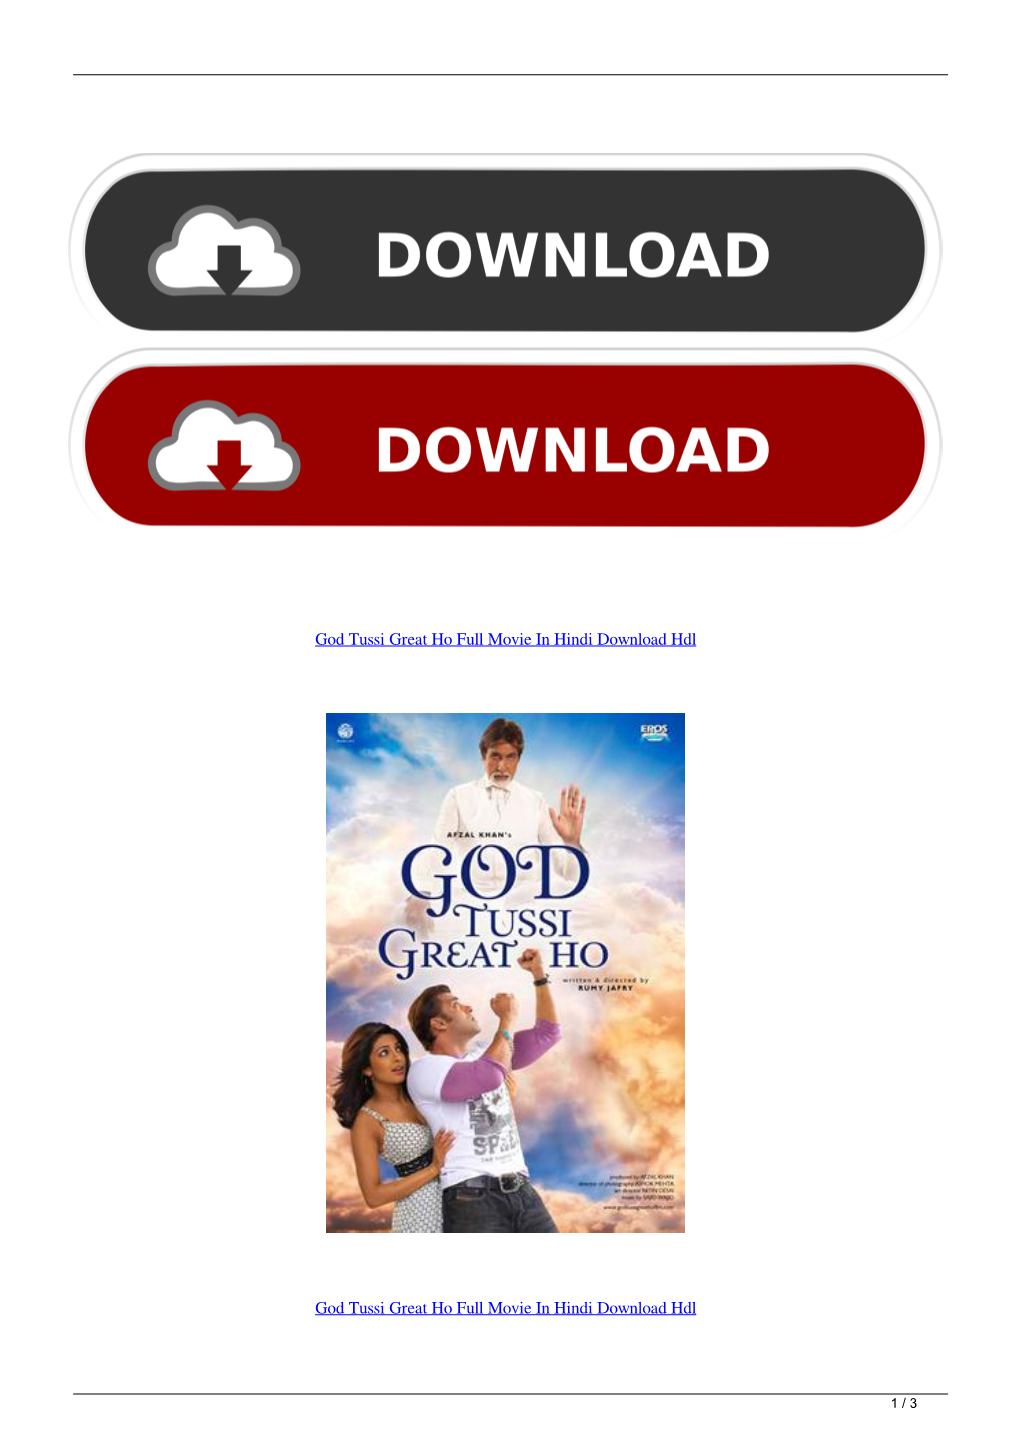 God Tussi Great Ho Full Movie in Hindi Download Hdl